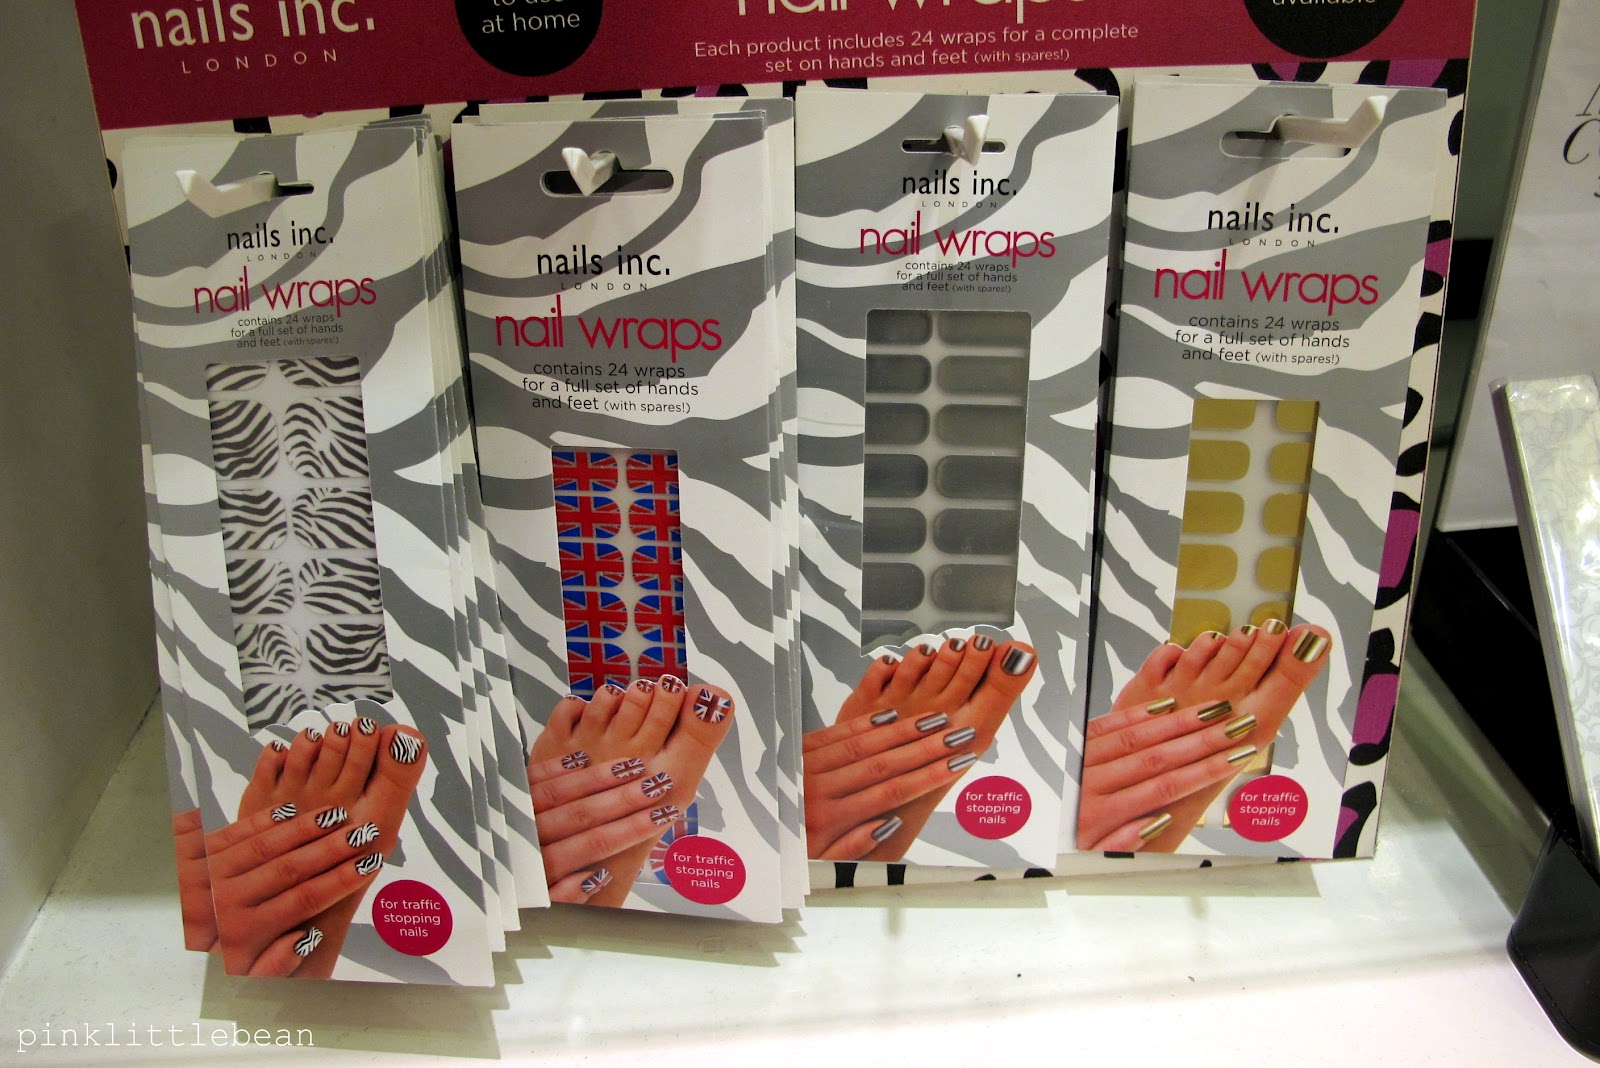 I didn't realise that Nails Inc did nail wraps. I'd like to try them out